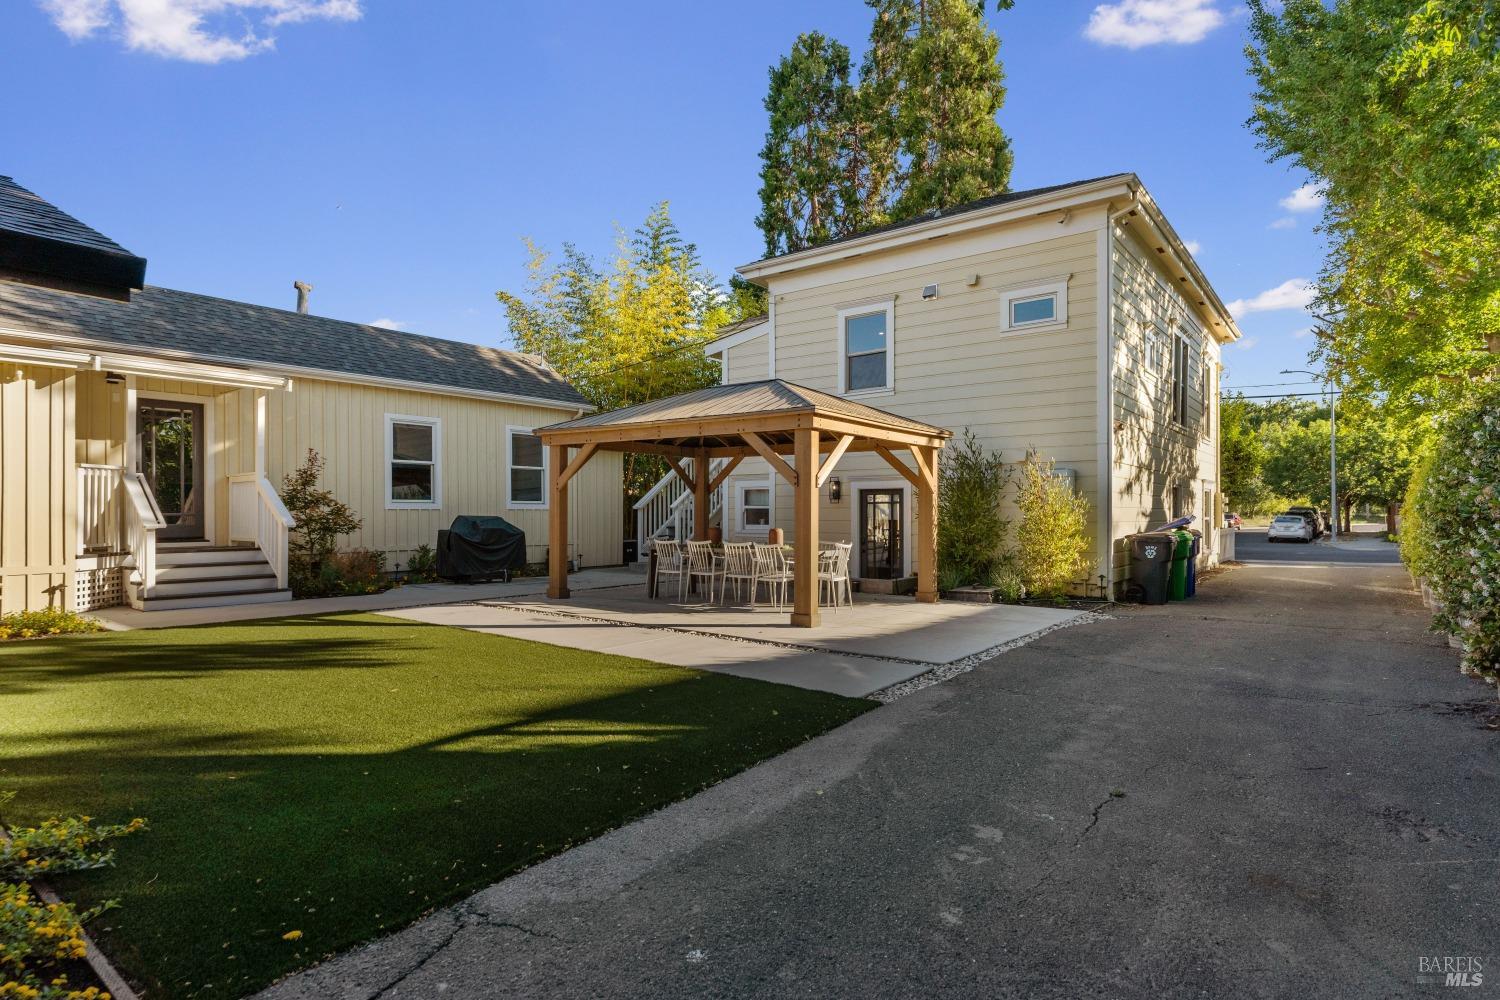 Photo of 1330 Brown St in Napa, CA